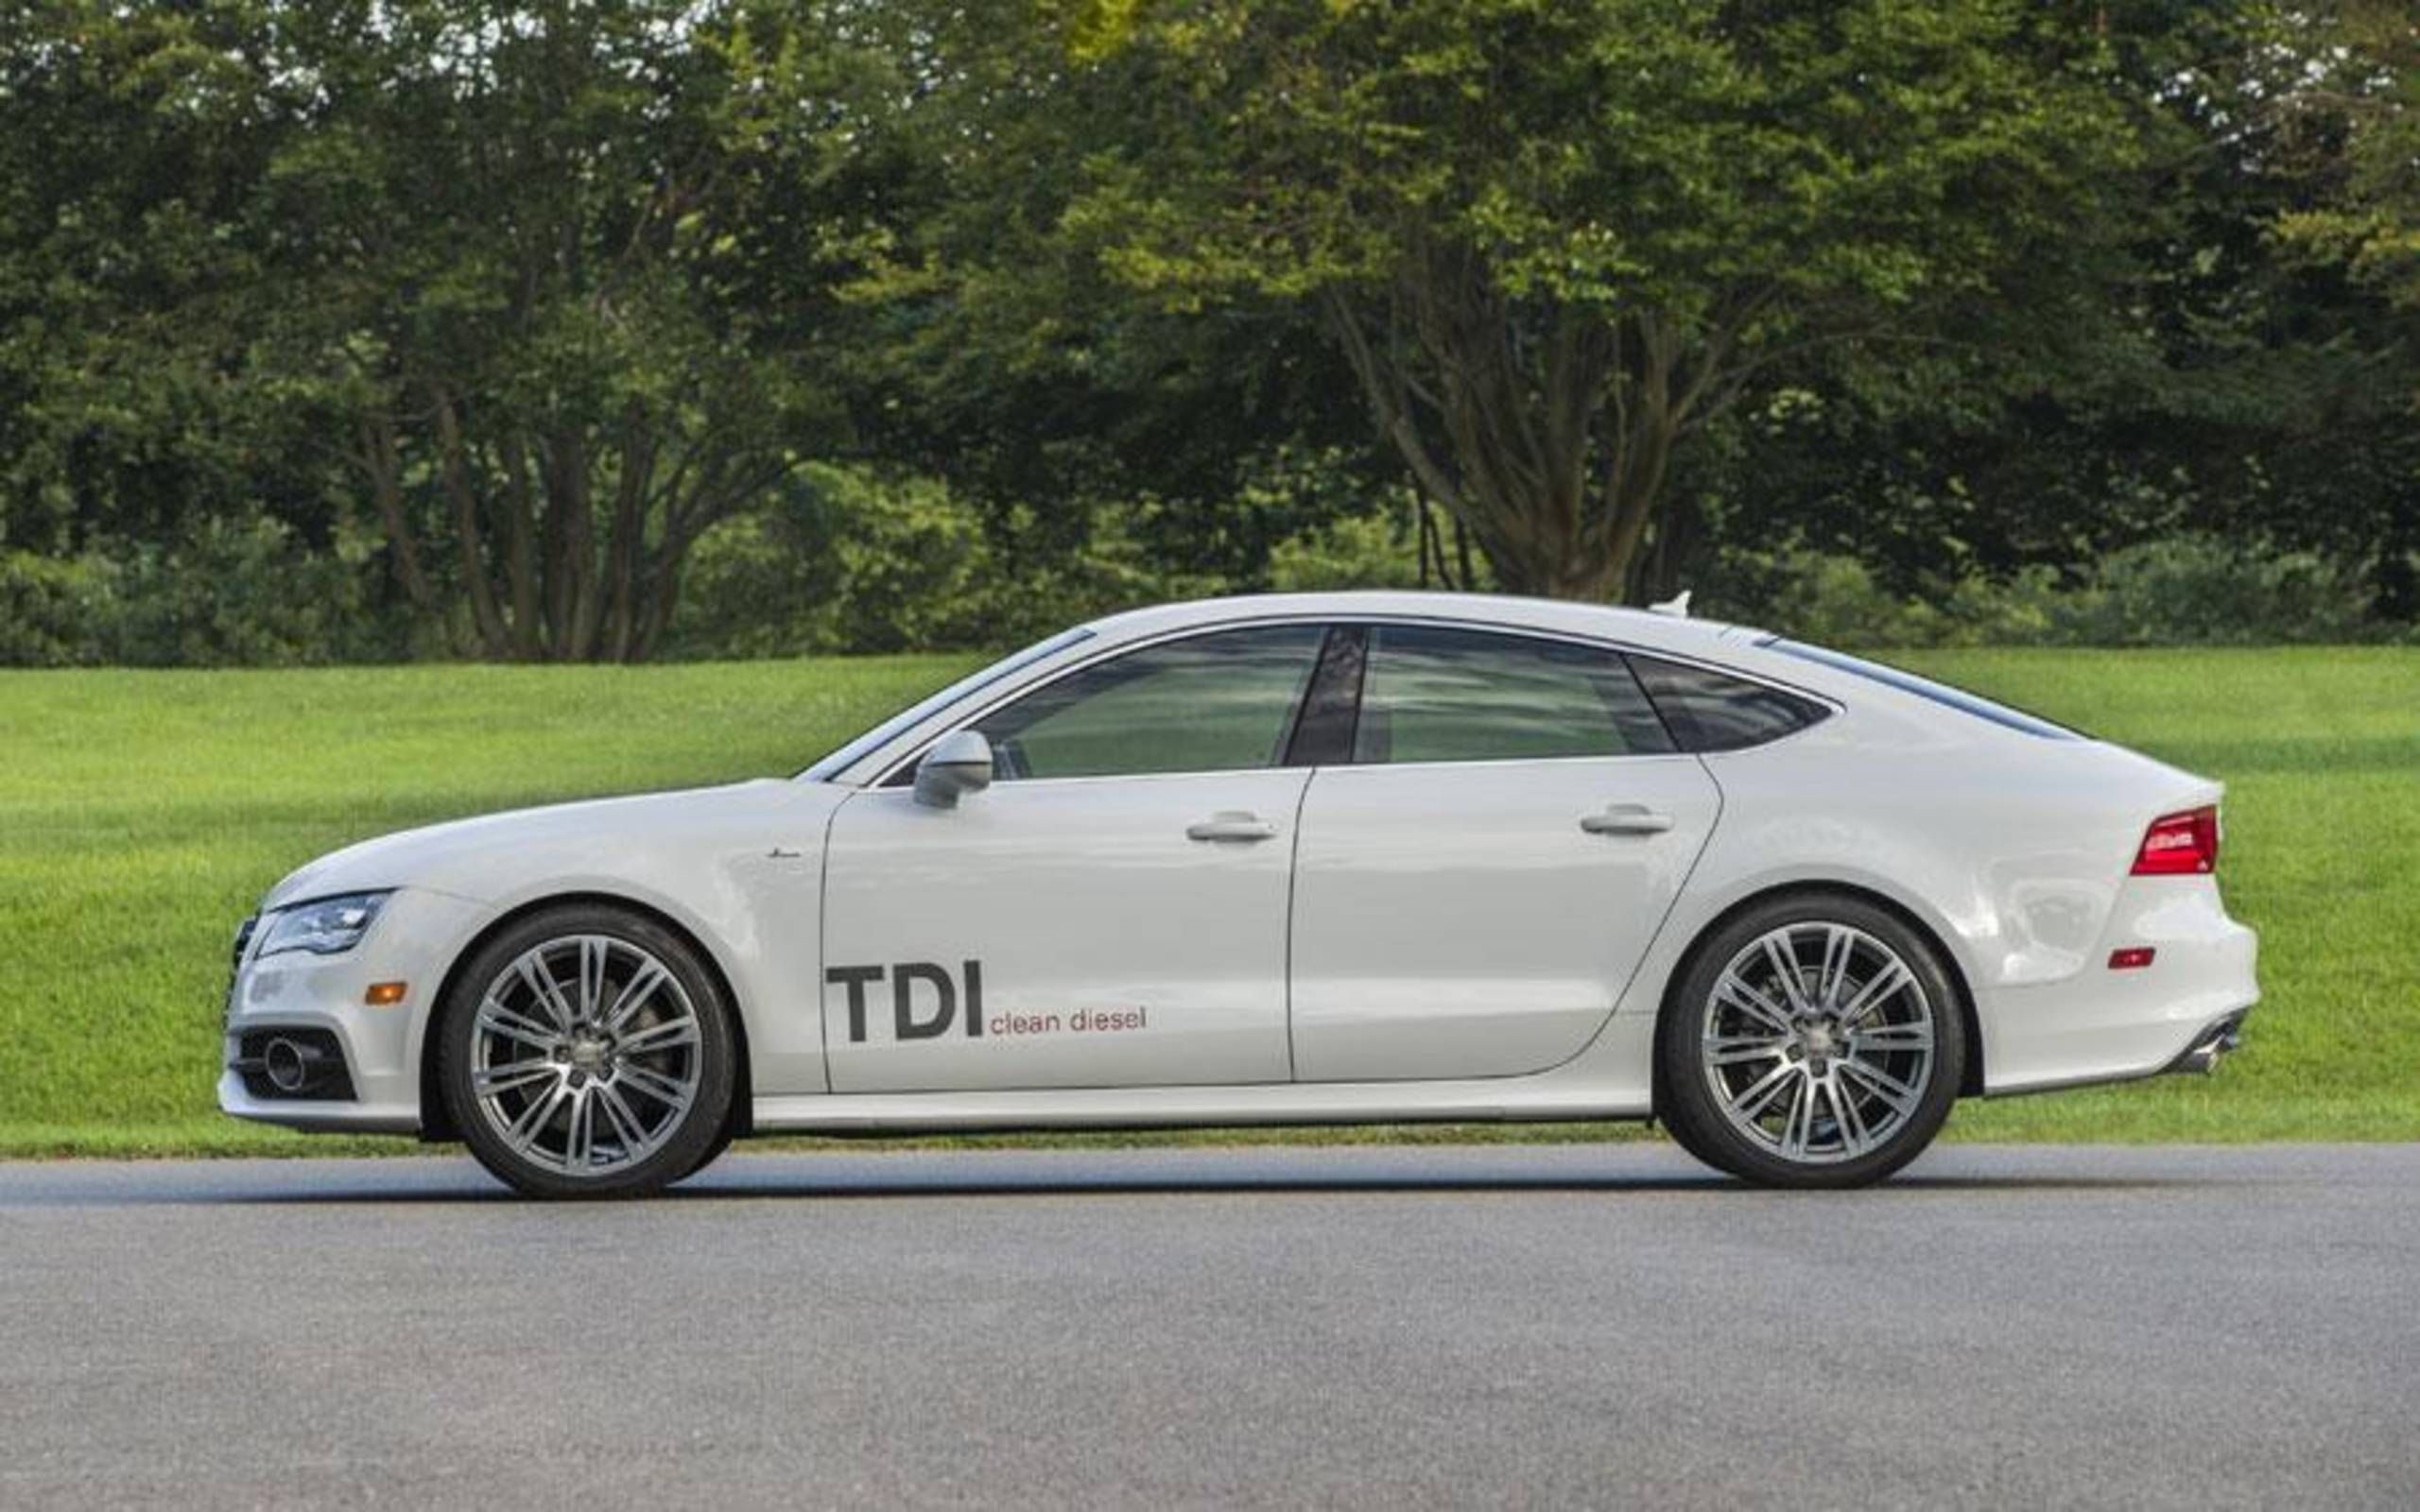 2014 Audi A7 Prices, Reviews, and Photos - MotorTrend